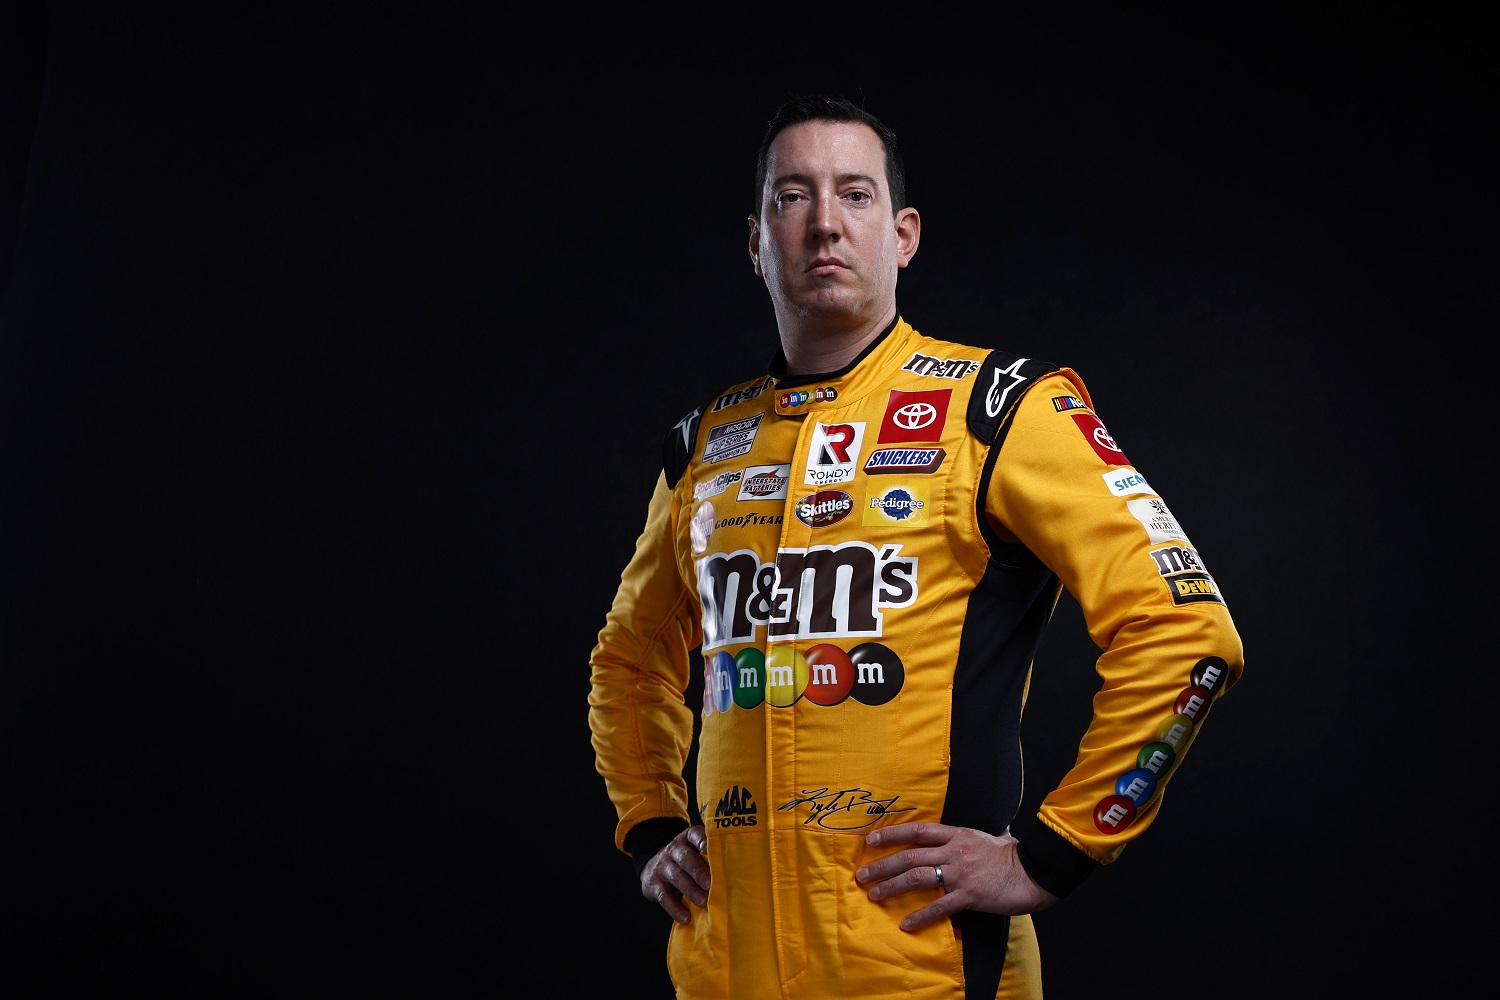 NASCAR driver Kyle Busch poses for a photo during NASCAR Production Days at Clutch Studios on Jan. 19, 2022, in Concord, North Carolina. | Jared C. Tilton/Getty Images